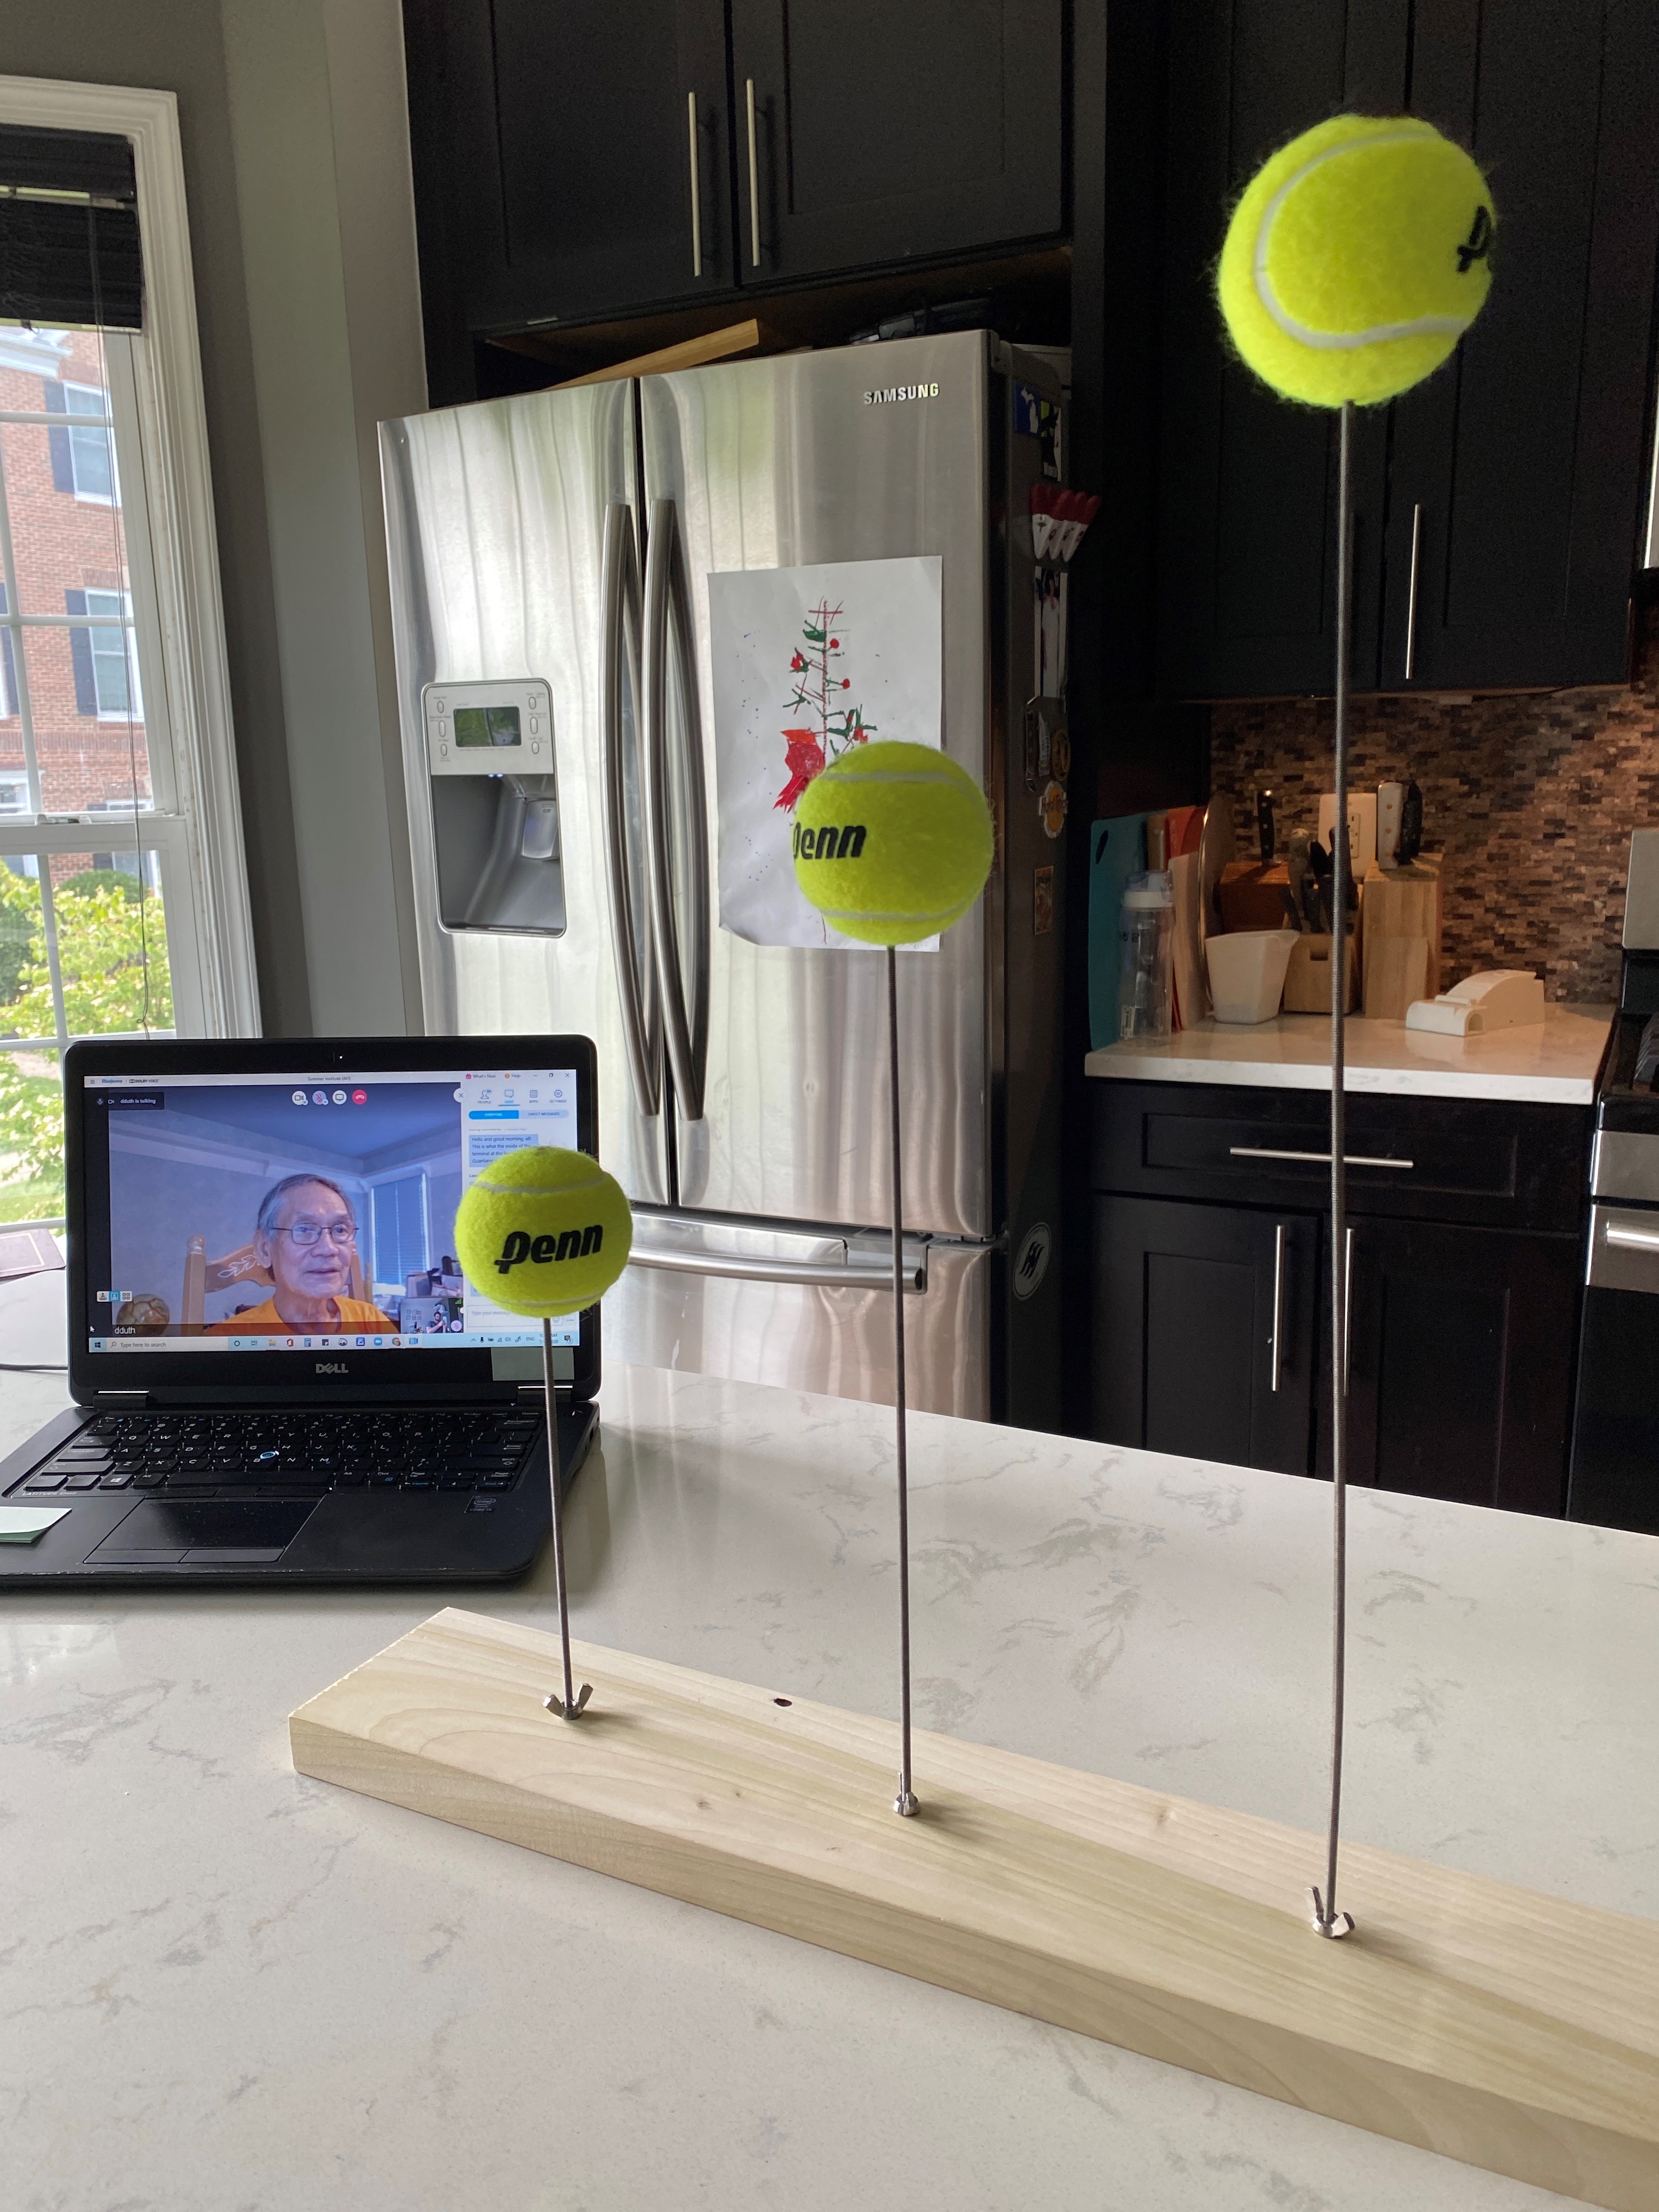 Three tennis balls attached to poles of differing sizes. A laptop sits on the counter next to the contraption.